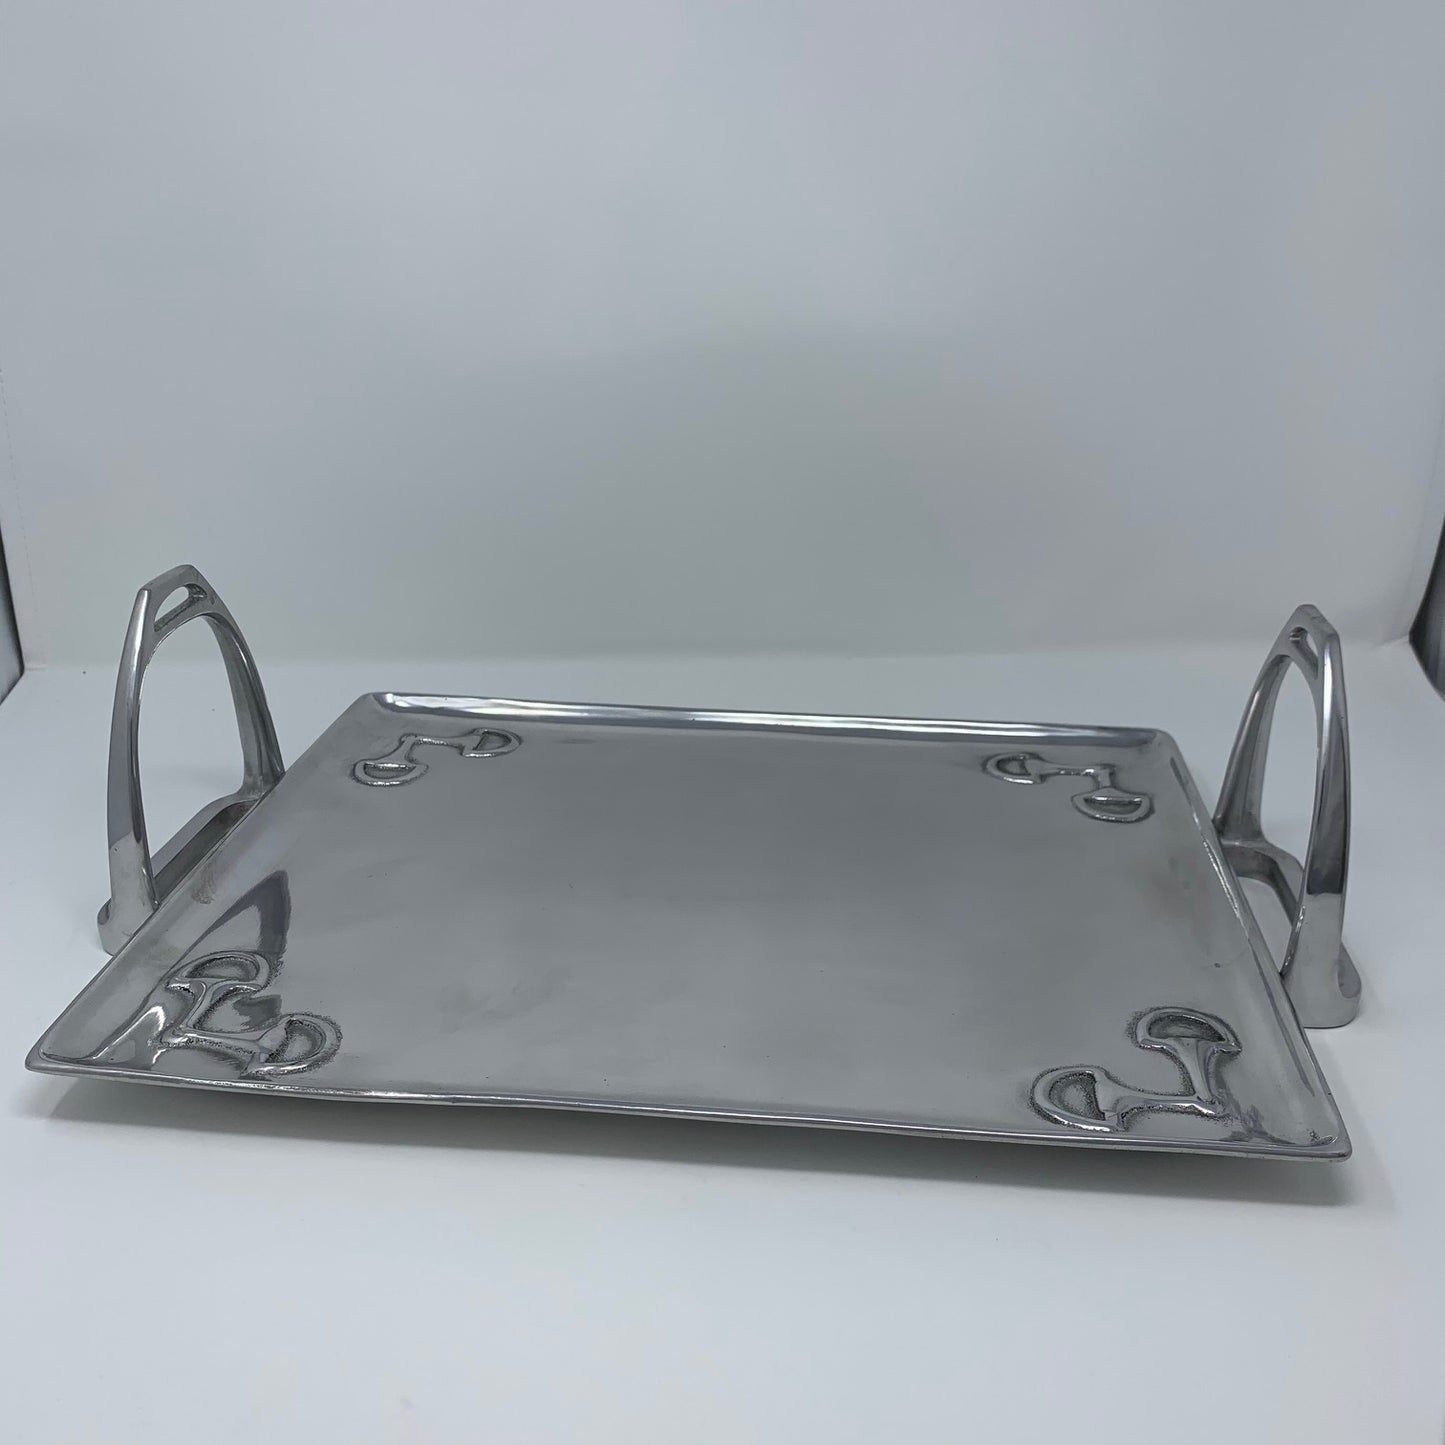 Stirrup Stackable Tray Large Stirrup on Each End as Handle Bit Decoration on Tray in Each Corner